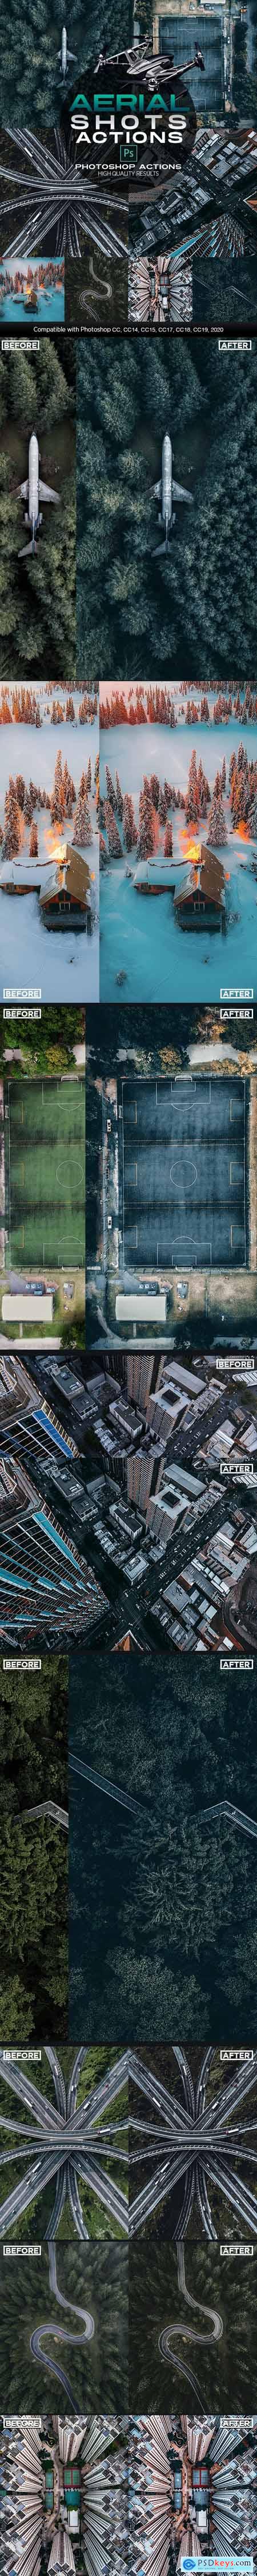 Aerial Shots Photoshop Actions Drone Shots Effects 26623763